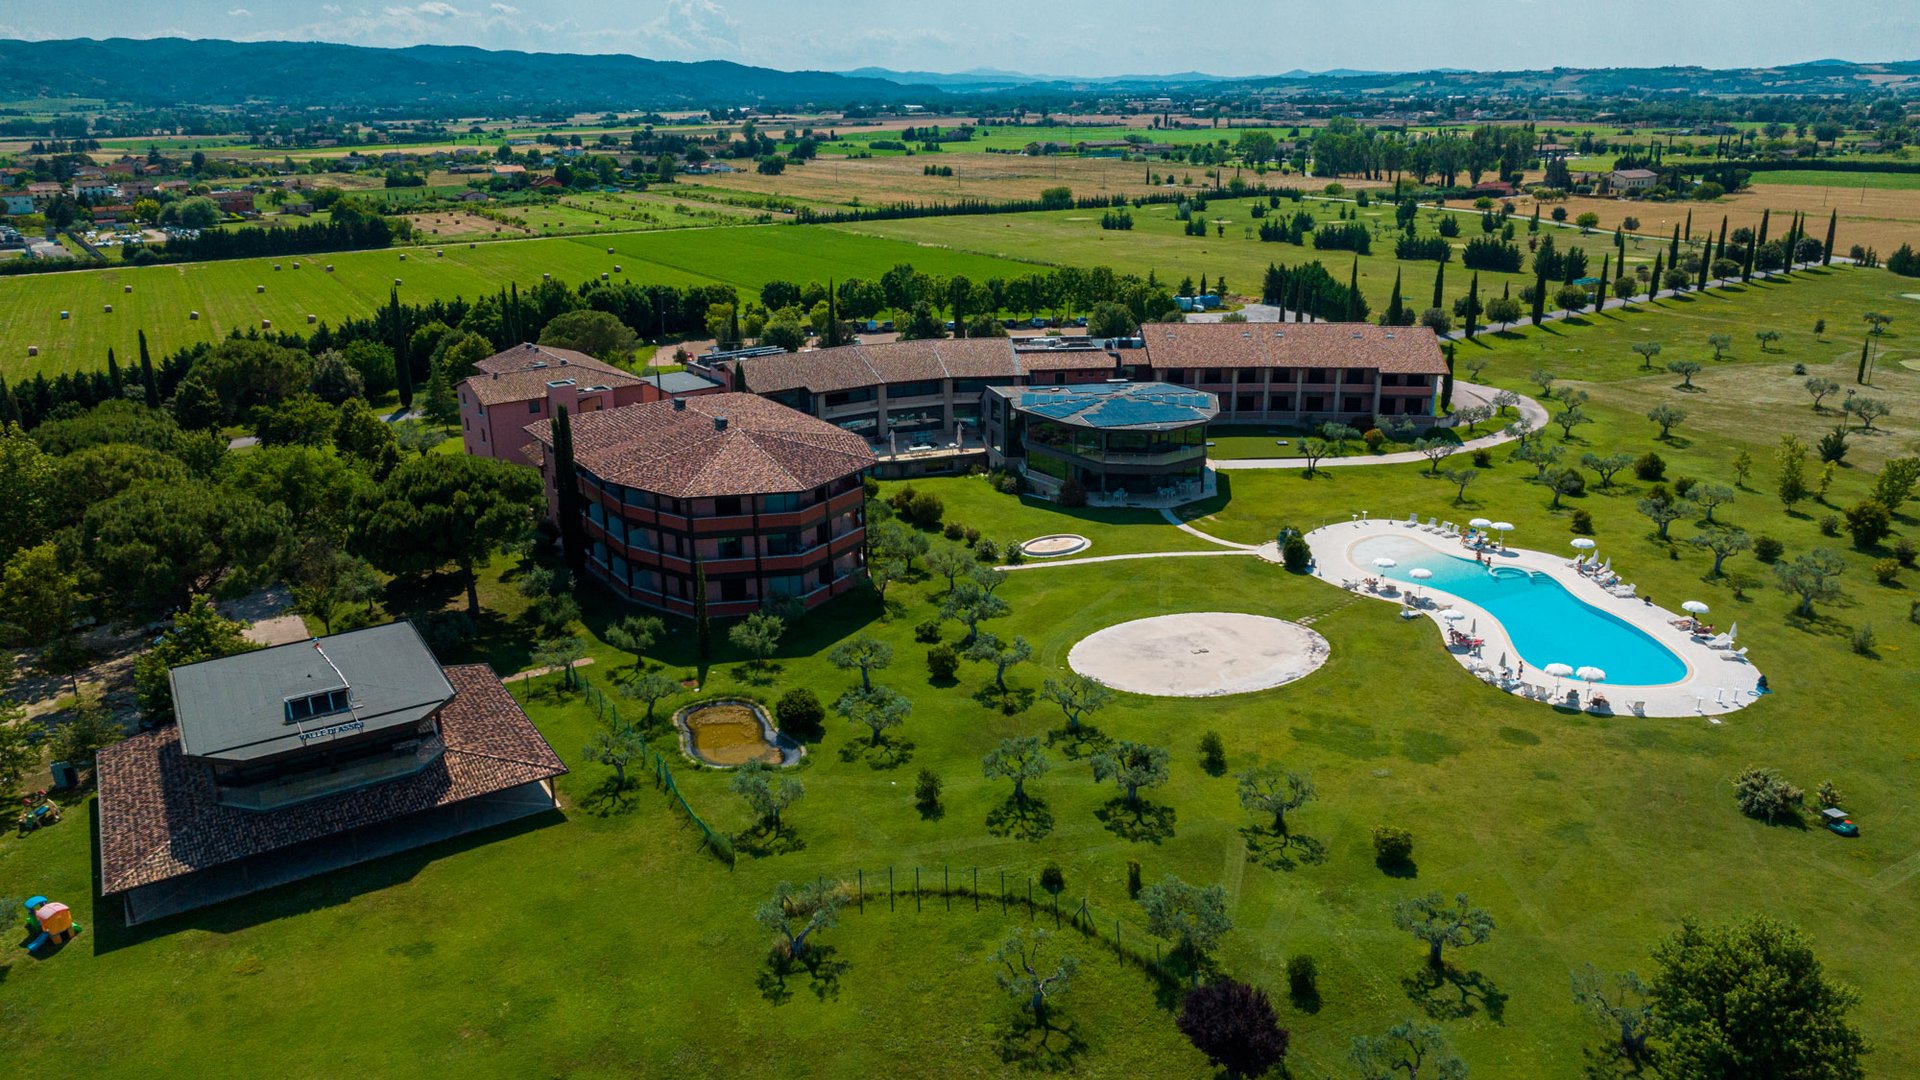 The hotel near Assisi that you’re looking for